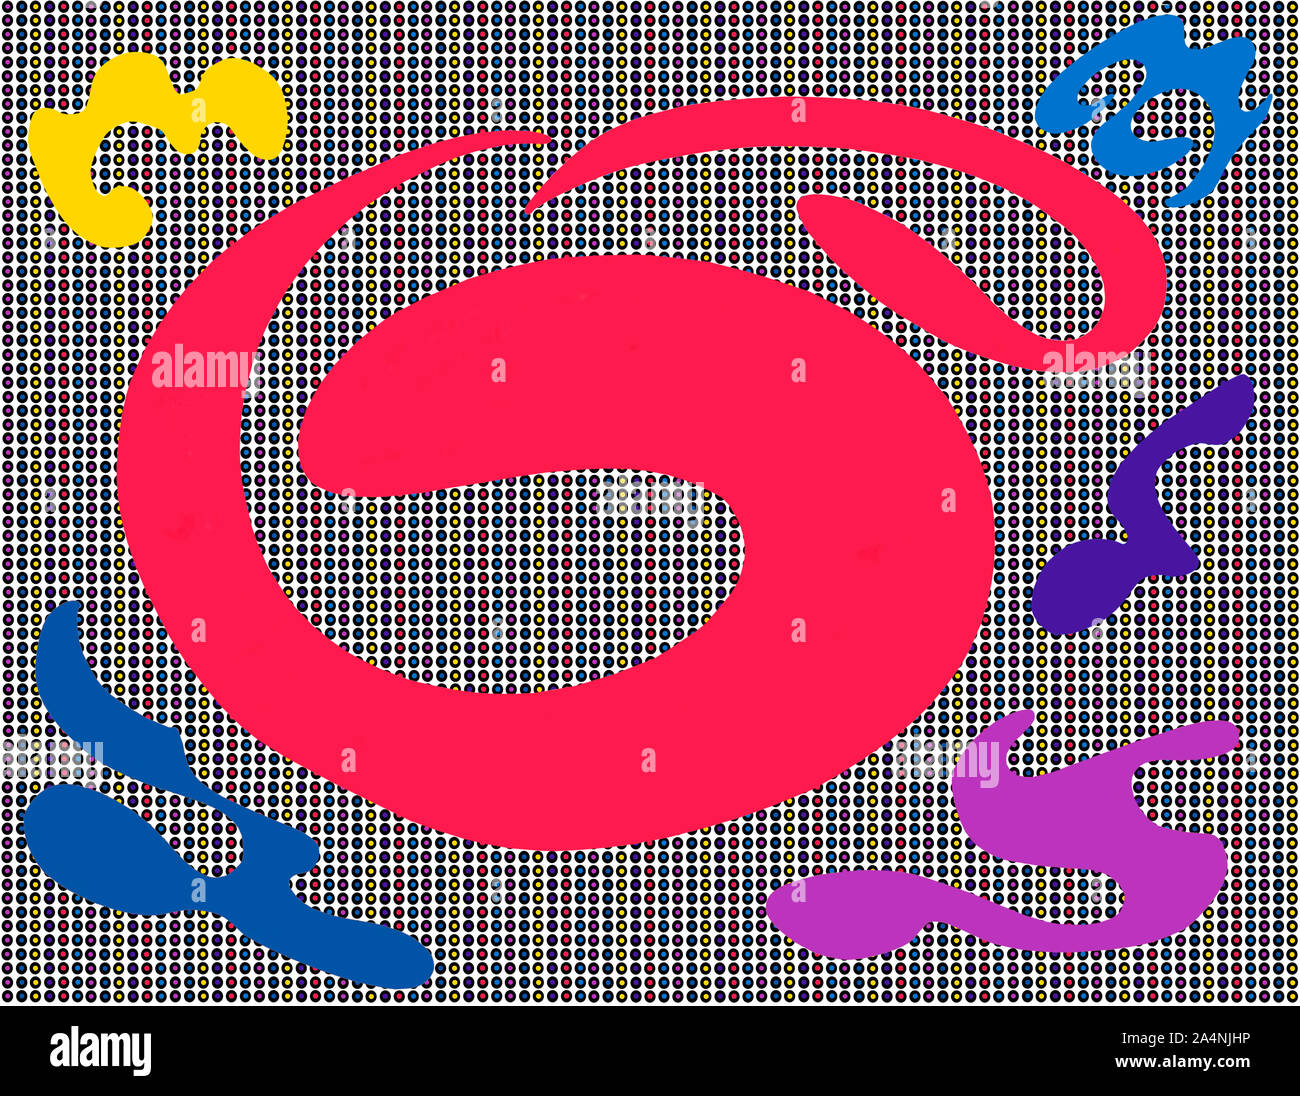 Motion Plus by Burton Zaro. The Graphic illustration has a variety of modern shapes in bright colors on a background of multi-colored dots Stock Photo